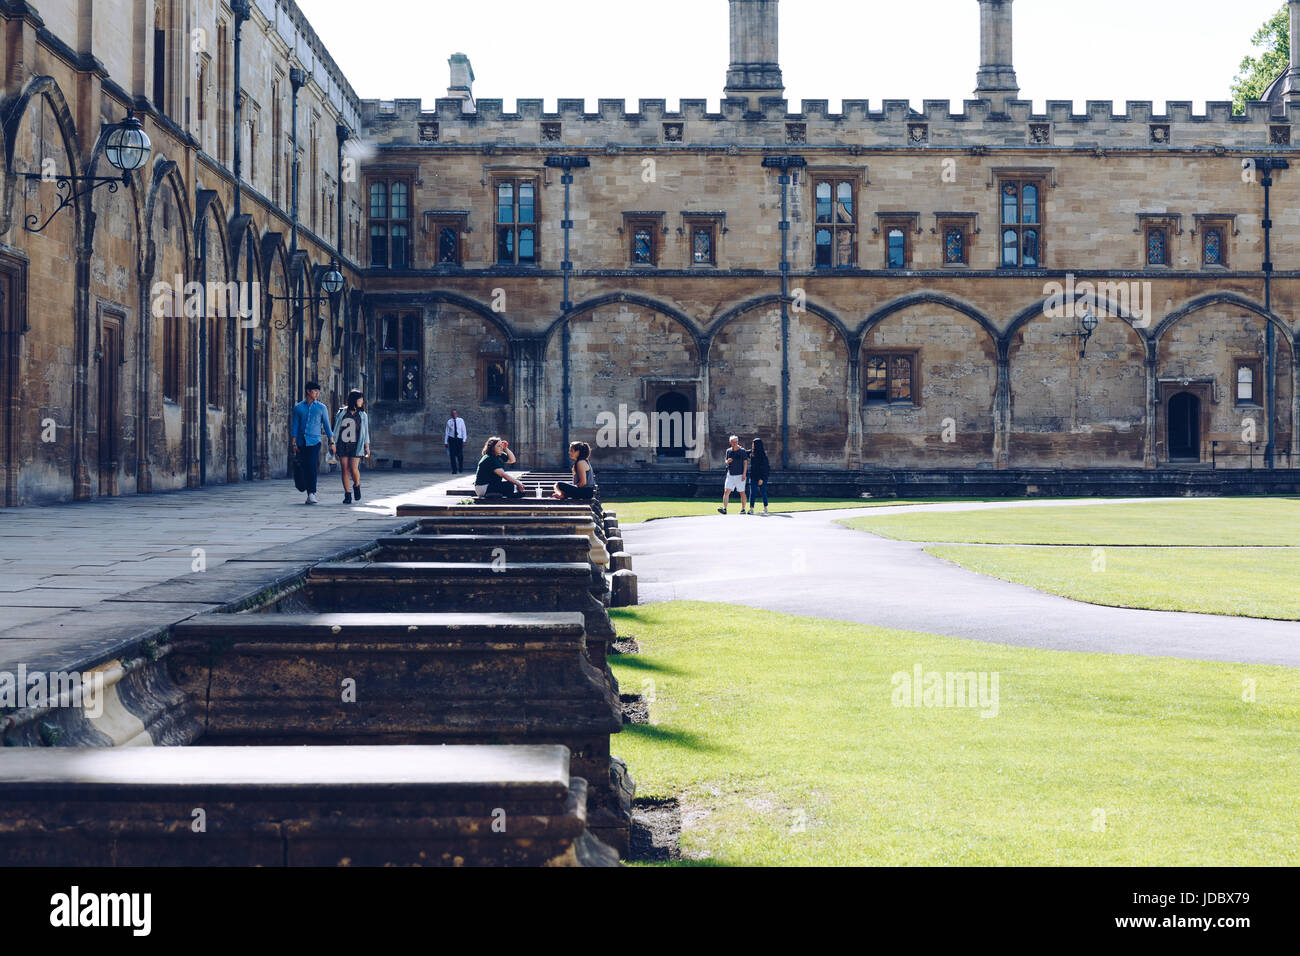 Students relax in the The Great Quadrangle, or Tom Quad, of Christ Church College, the largest college quad in Oxford. Stock Photo